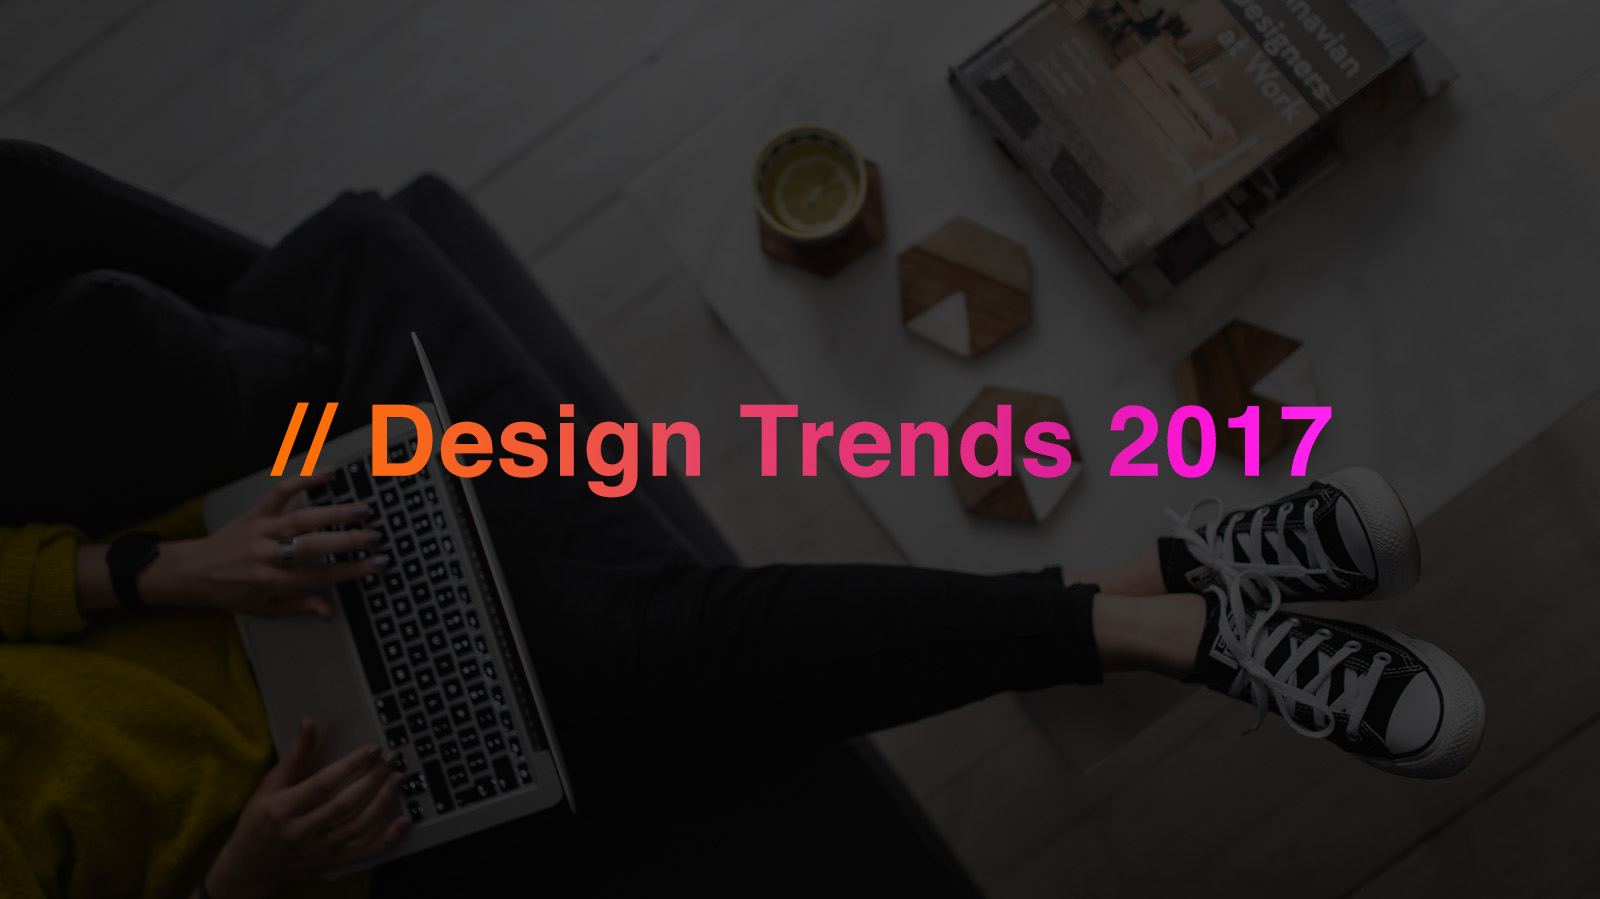 What are the most popular design trends in 2017?